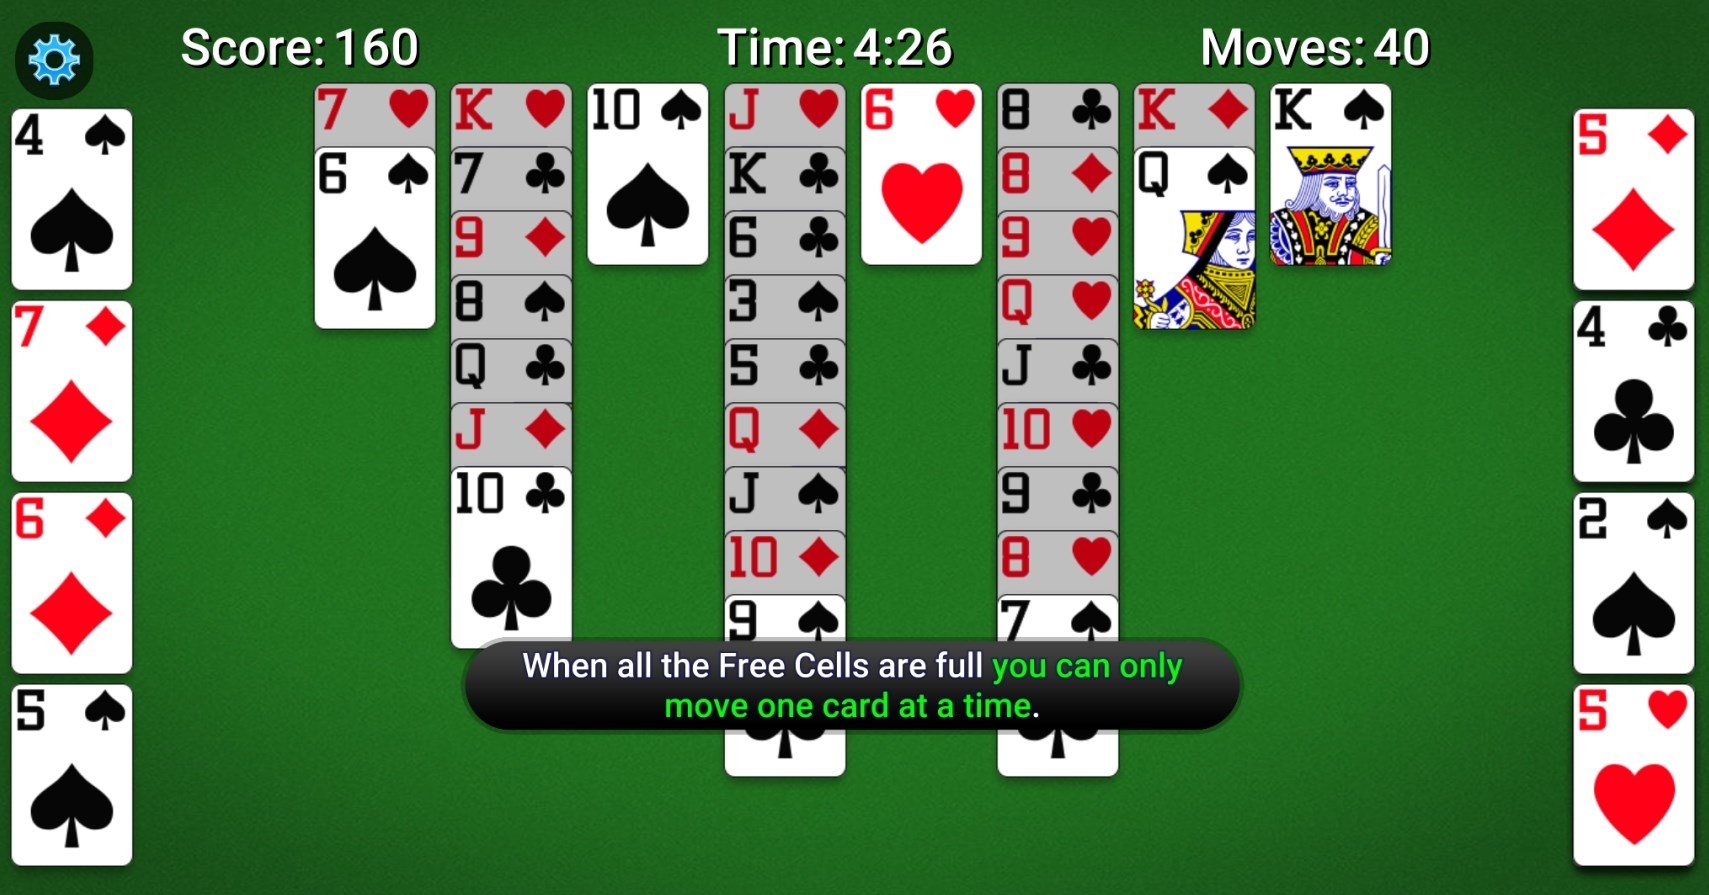 Freecell Solitaire para Android - Download